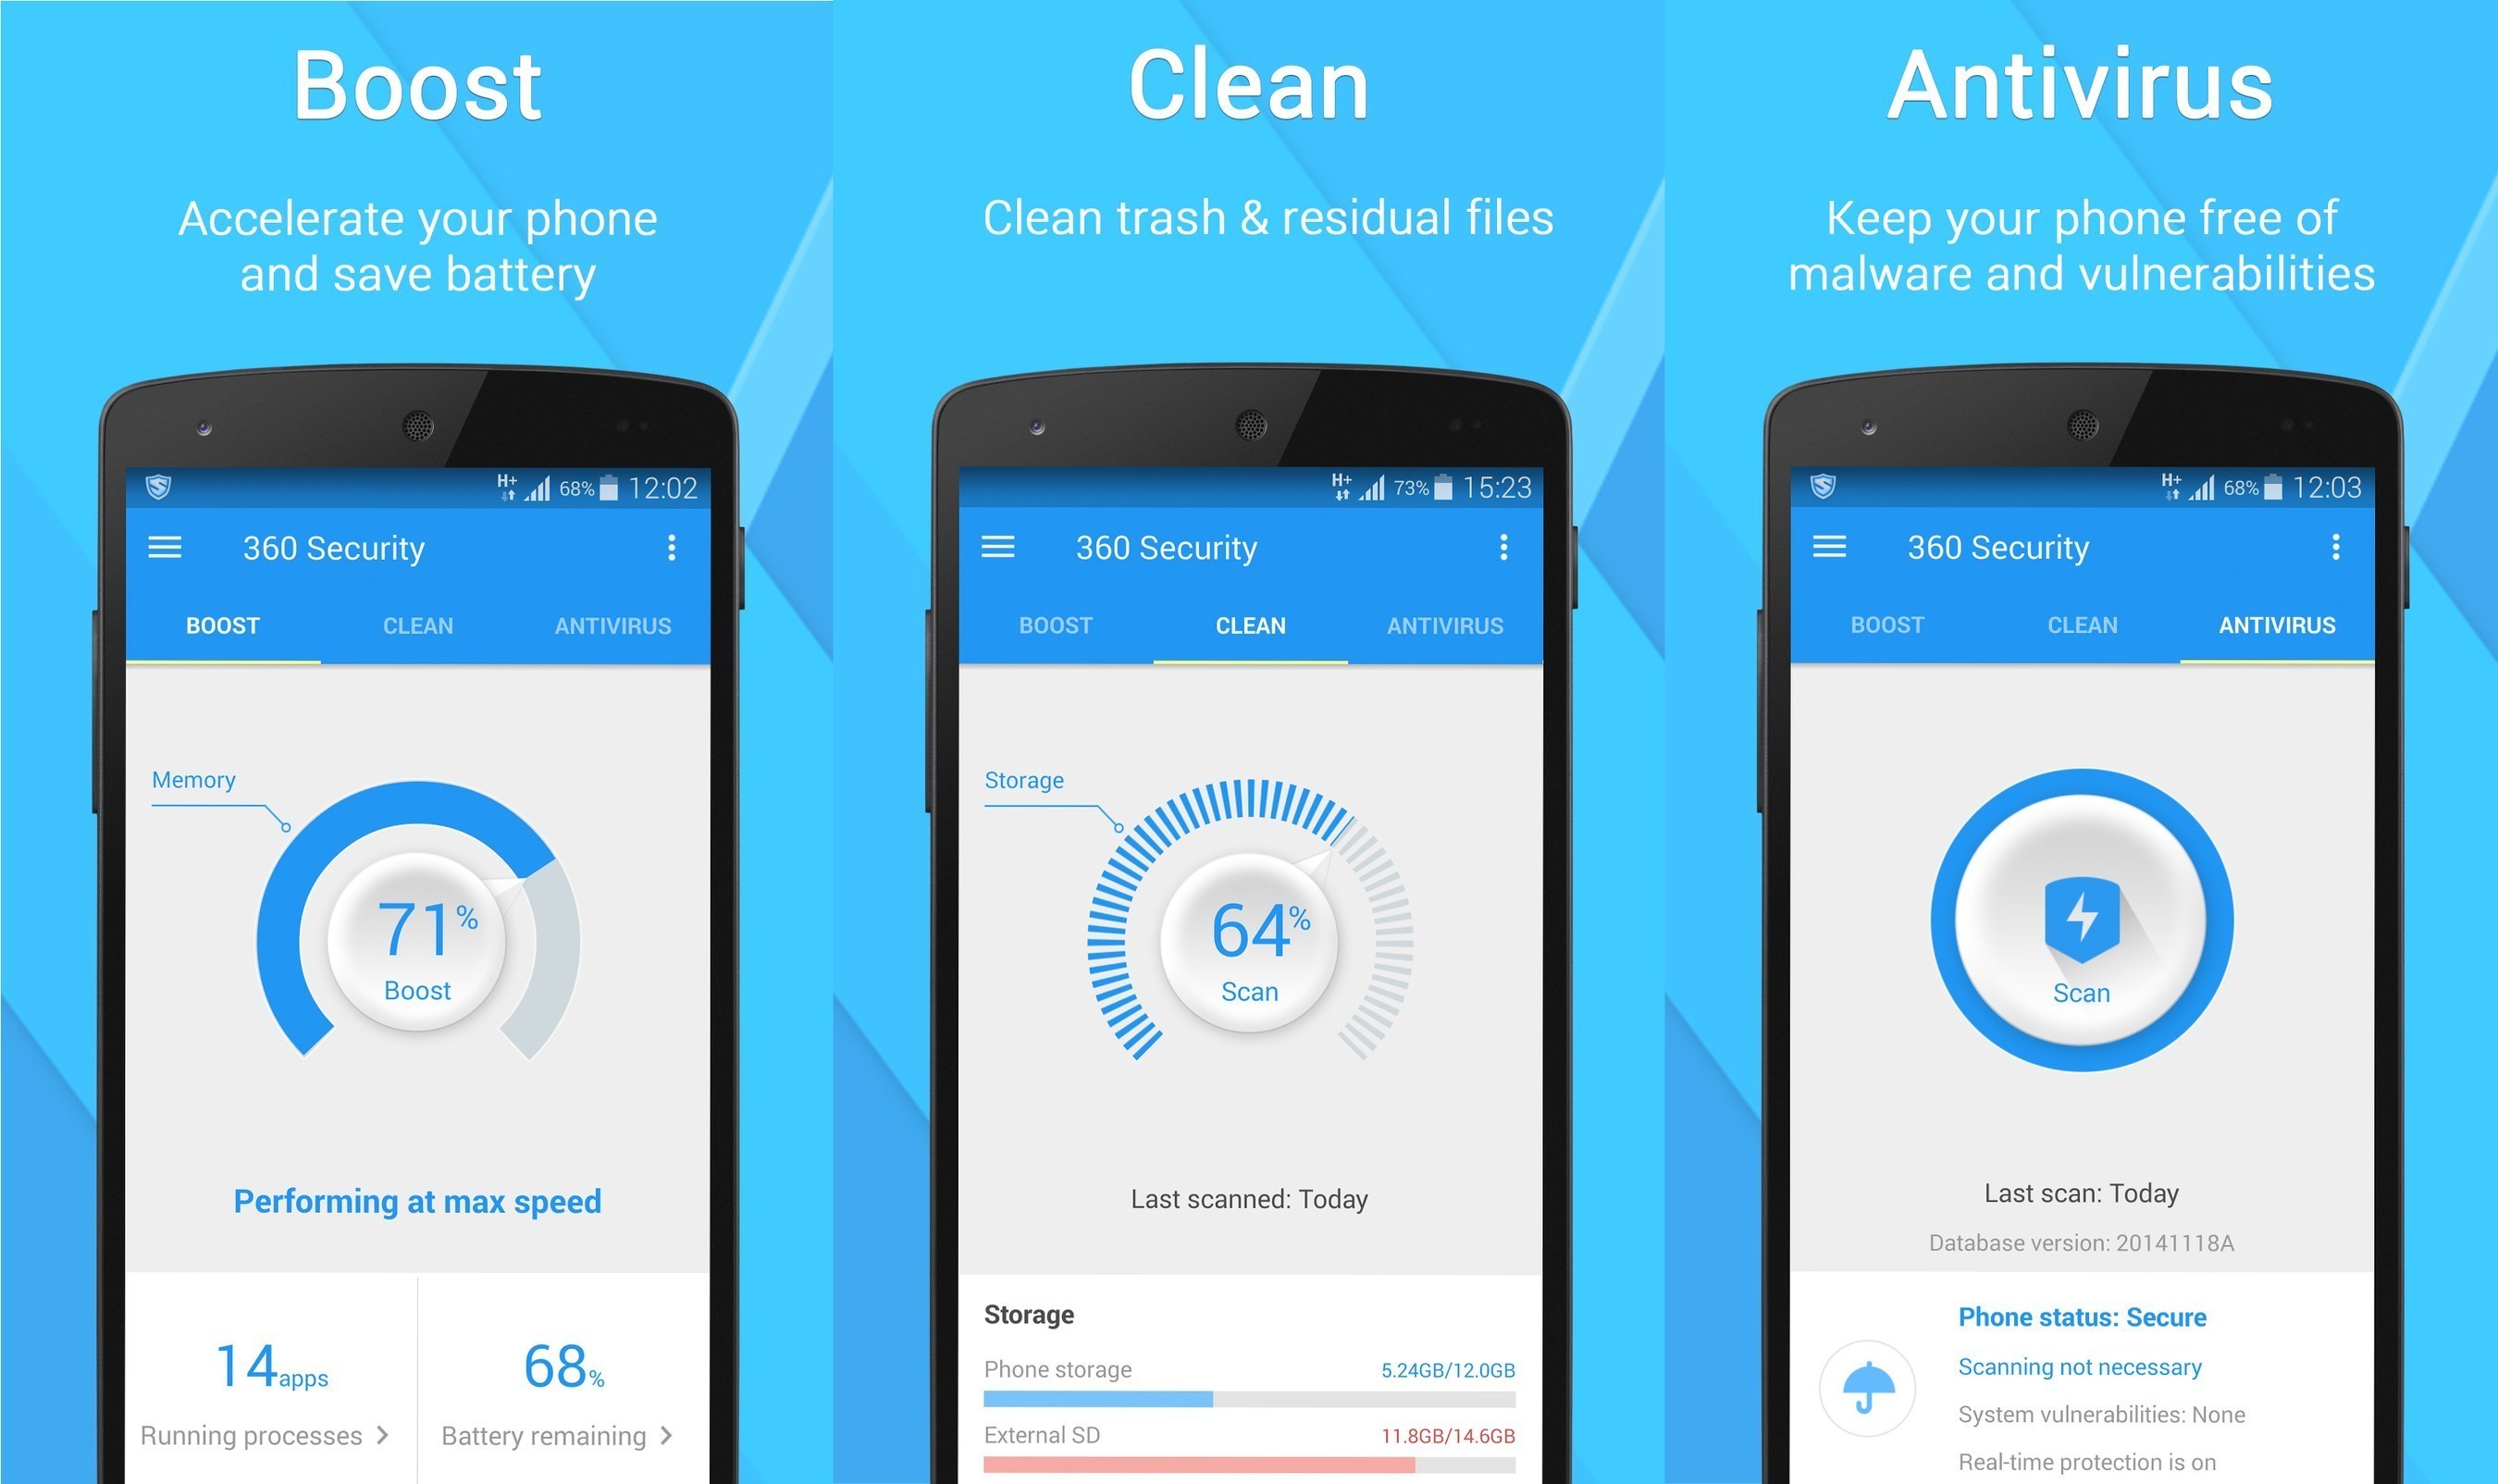 Boost your smartphone's speed, clean junk files, fend off viruses, and more with 360 Security.